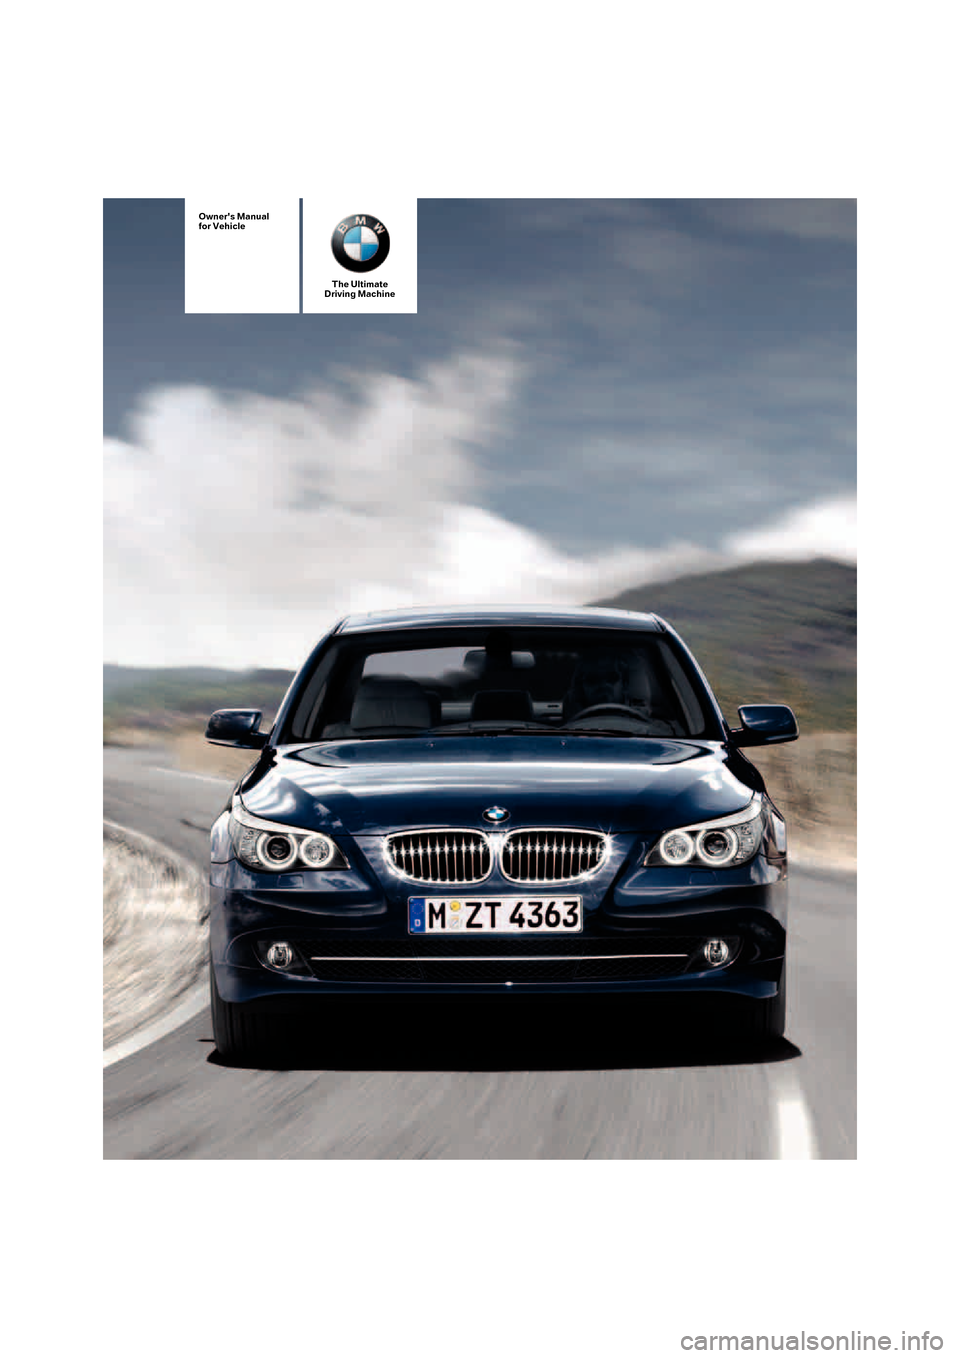 BMW 550I TOURING 2007 E61 Owners Manual The Ultimate
Driving Machine
Owners Manual
for Vehicle 